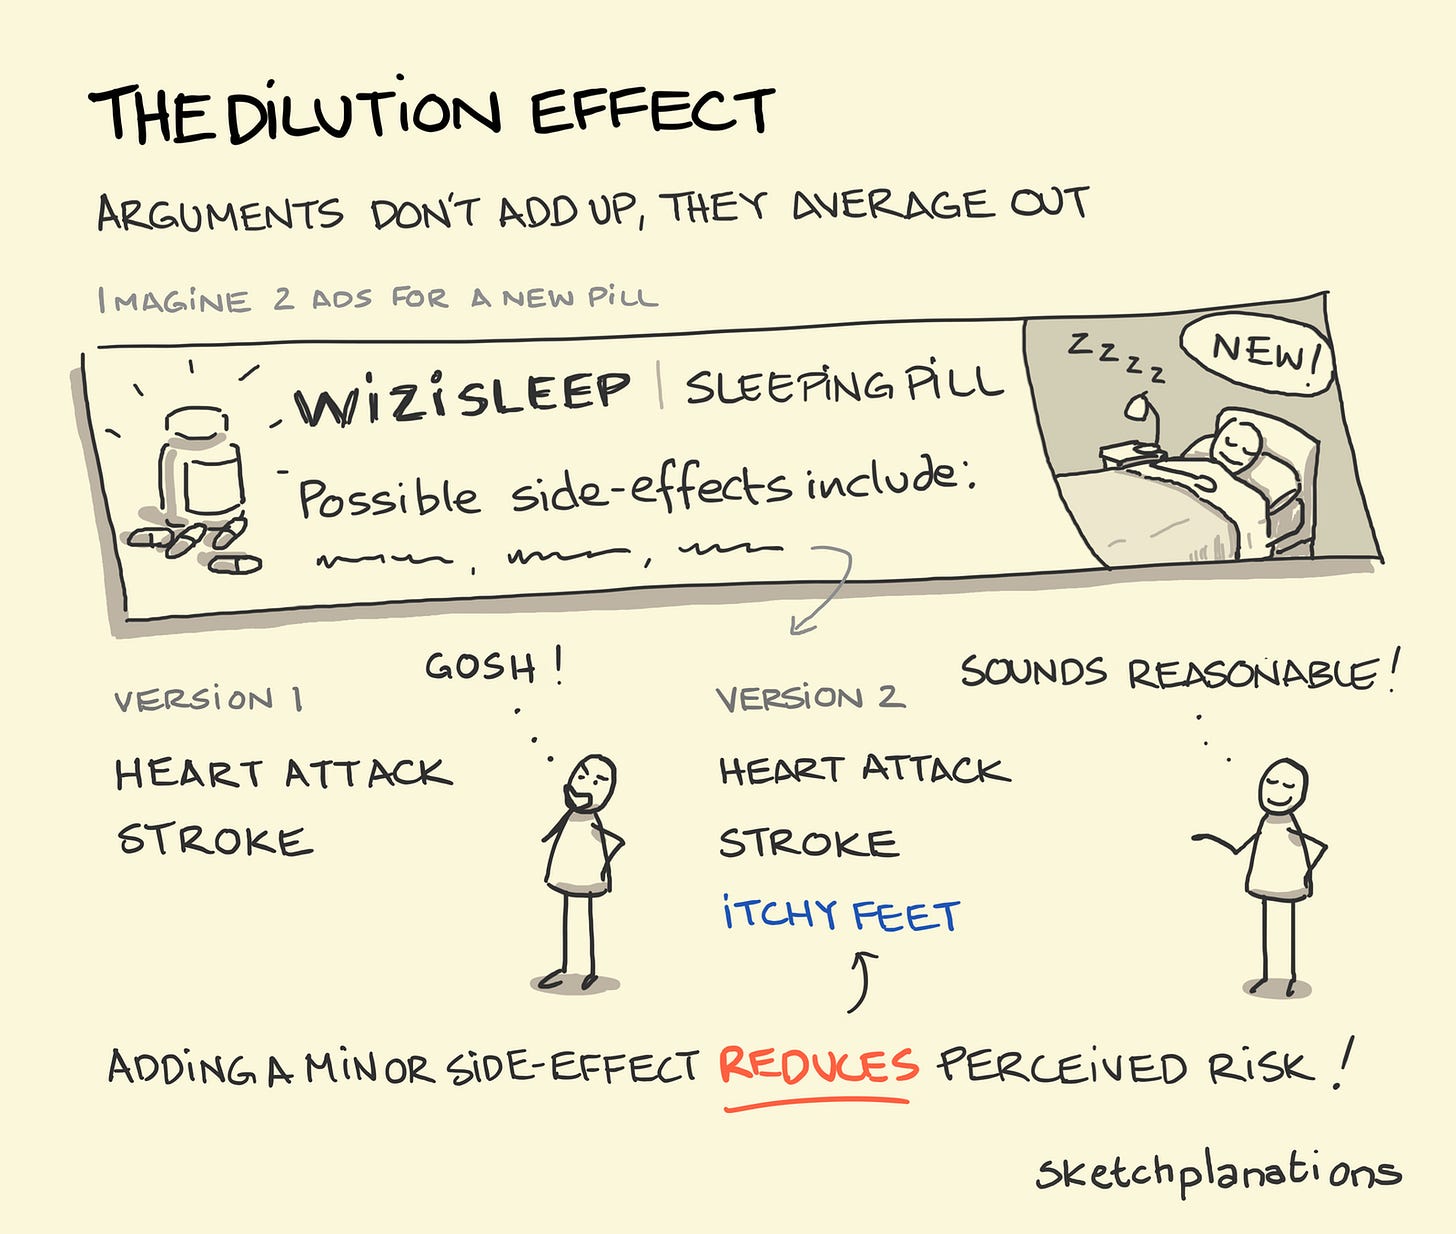 The dilution effect - Sketchplanations